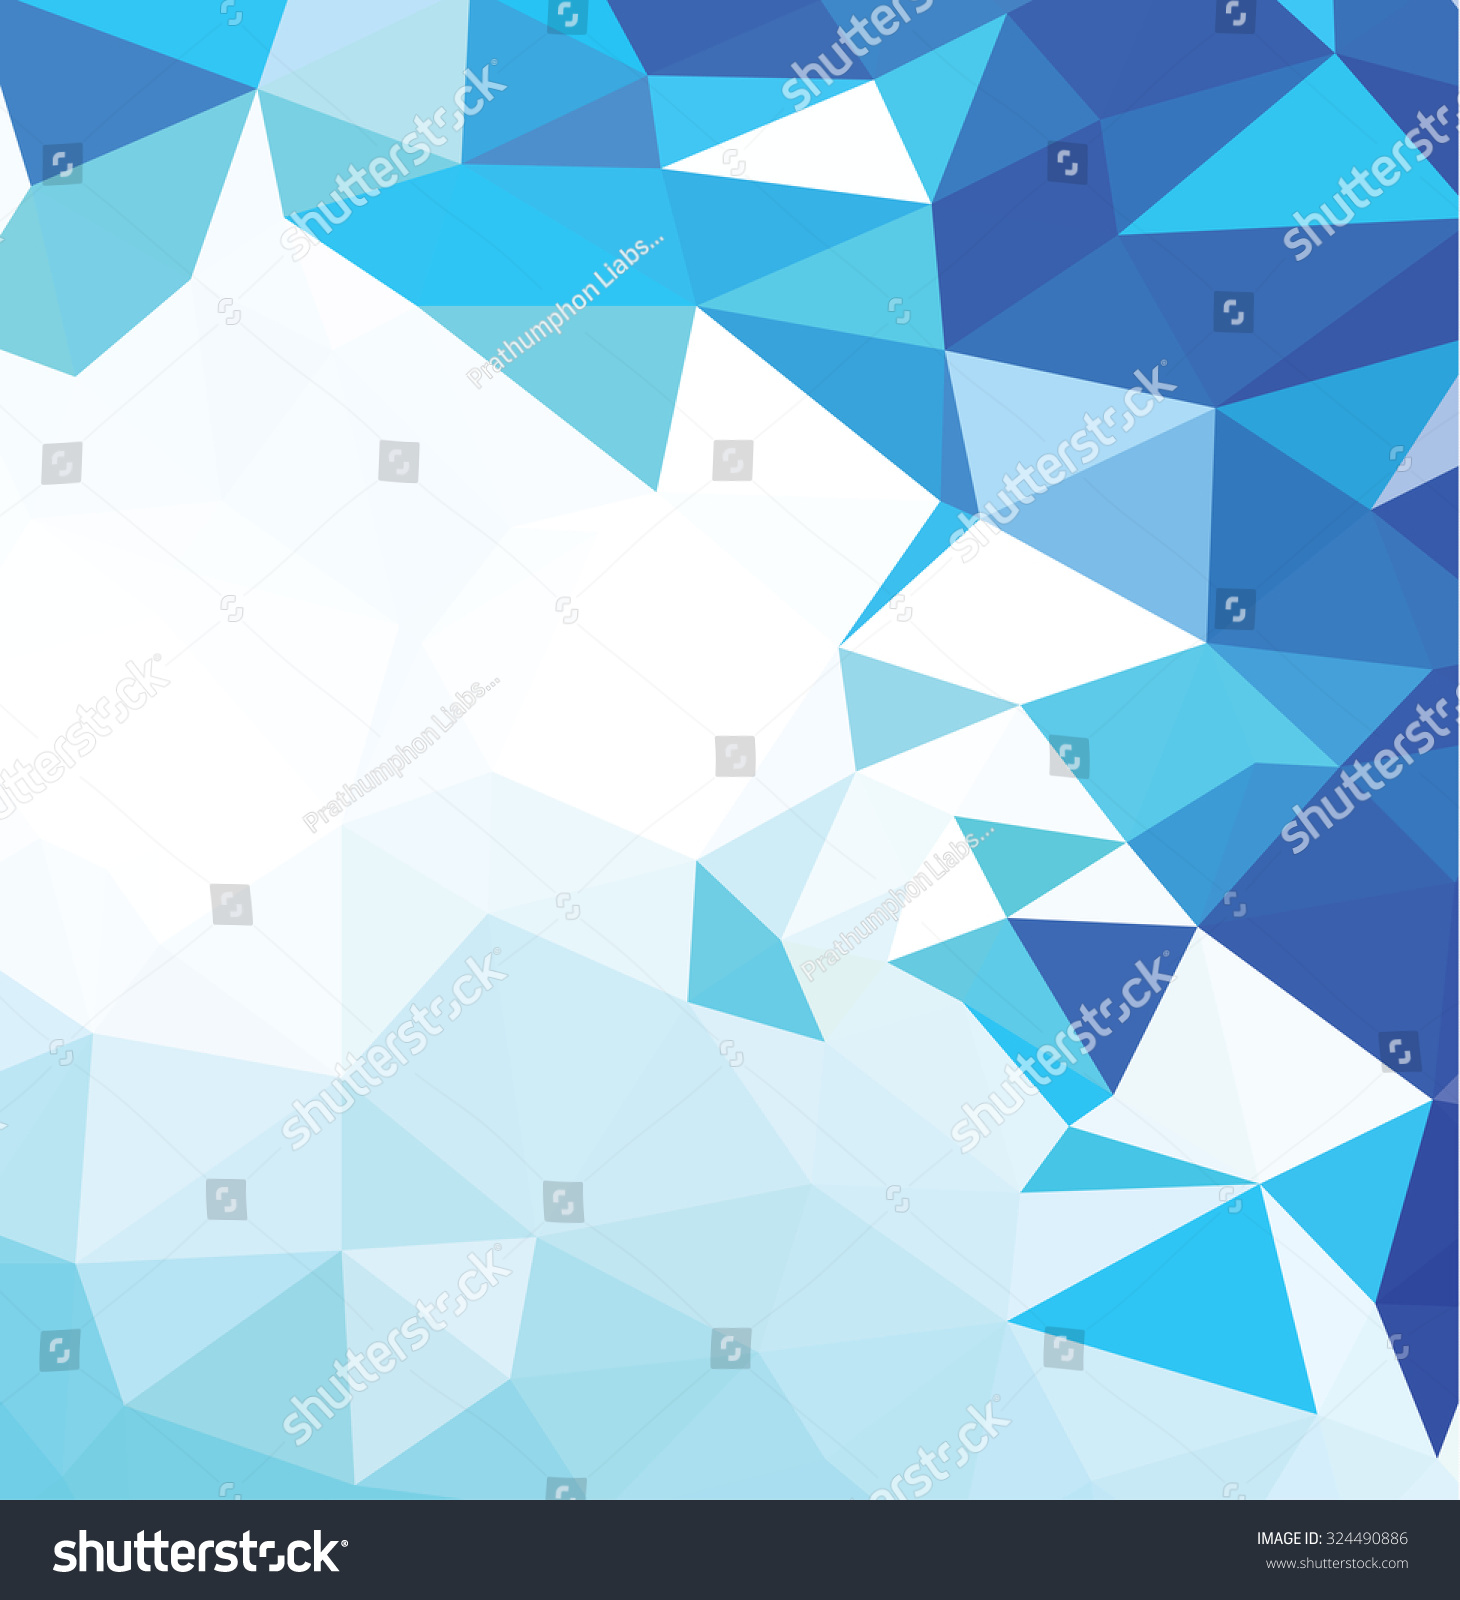 Abstract Triangle Art Pastel Colors Stock Vector 324490886 ...